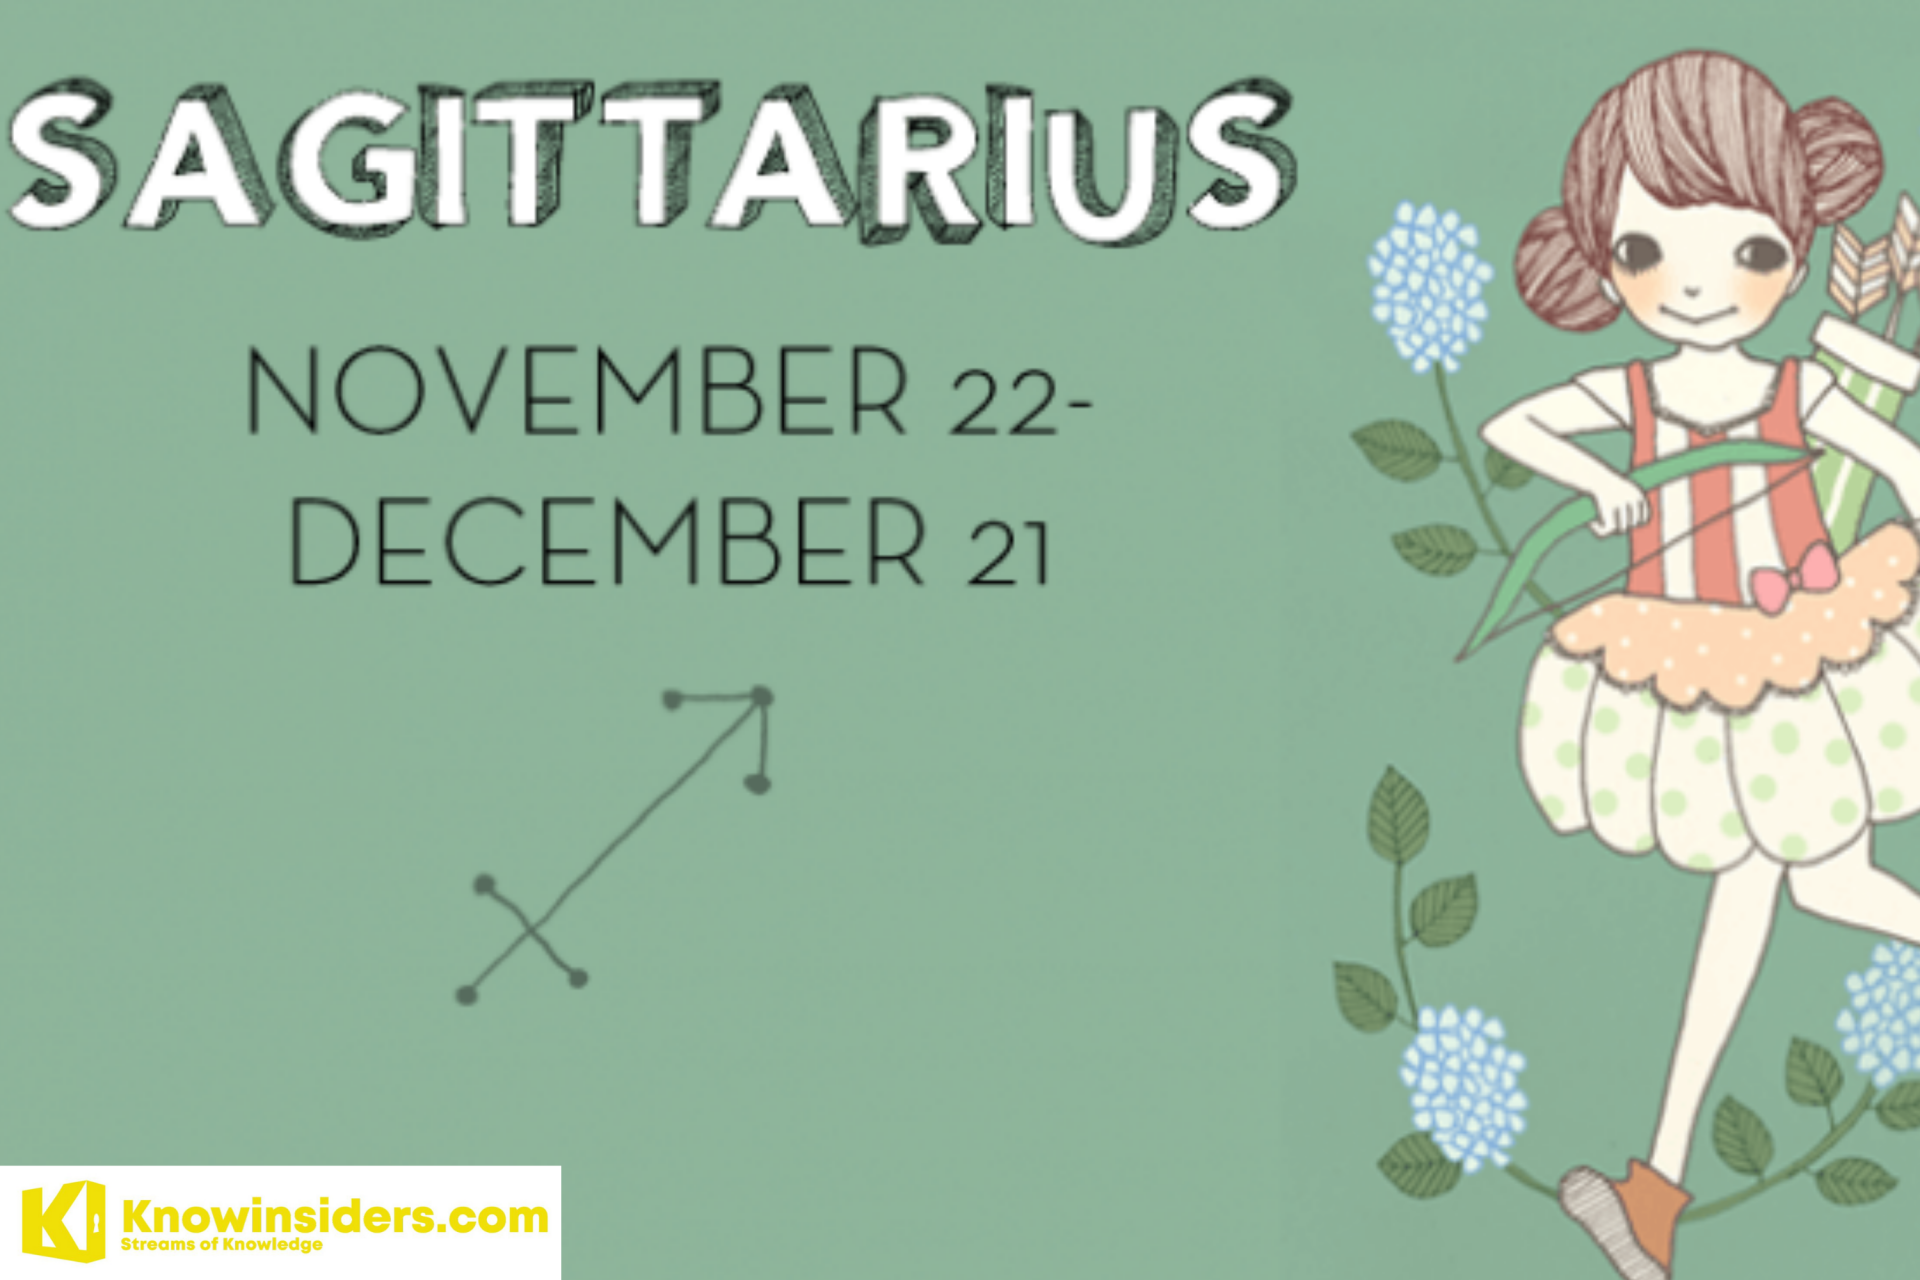 SAGITTARIUS Weekly Horoscope (April 26 - May 2): Predictions for Love, Finance, Career and Health